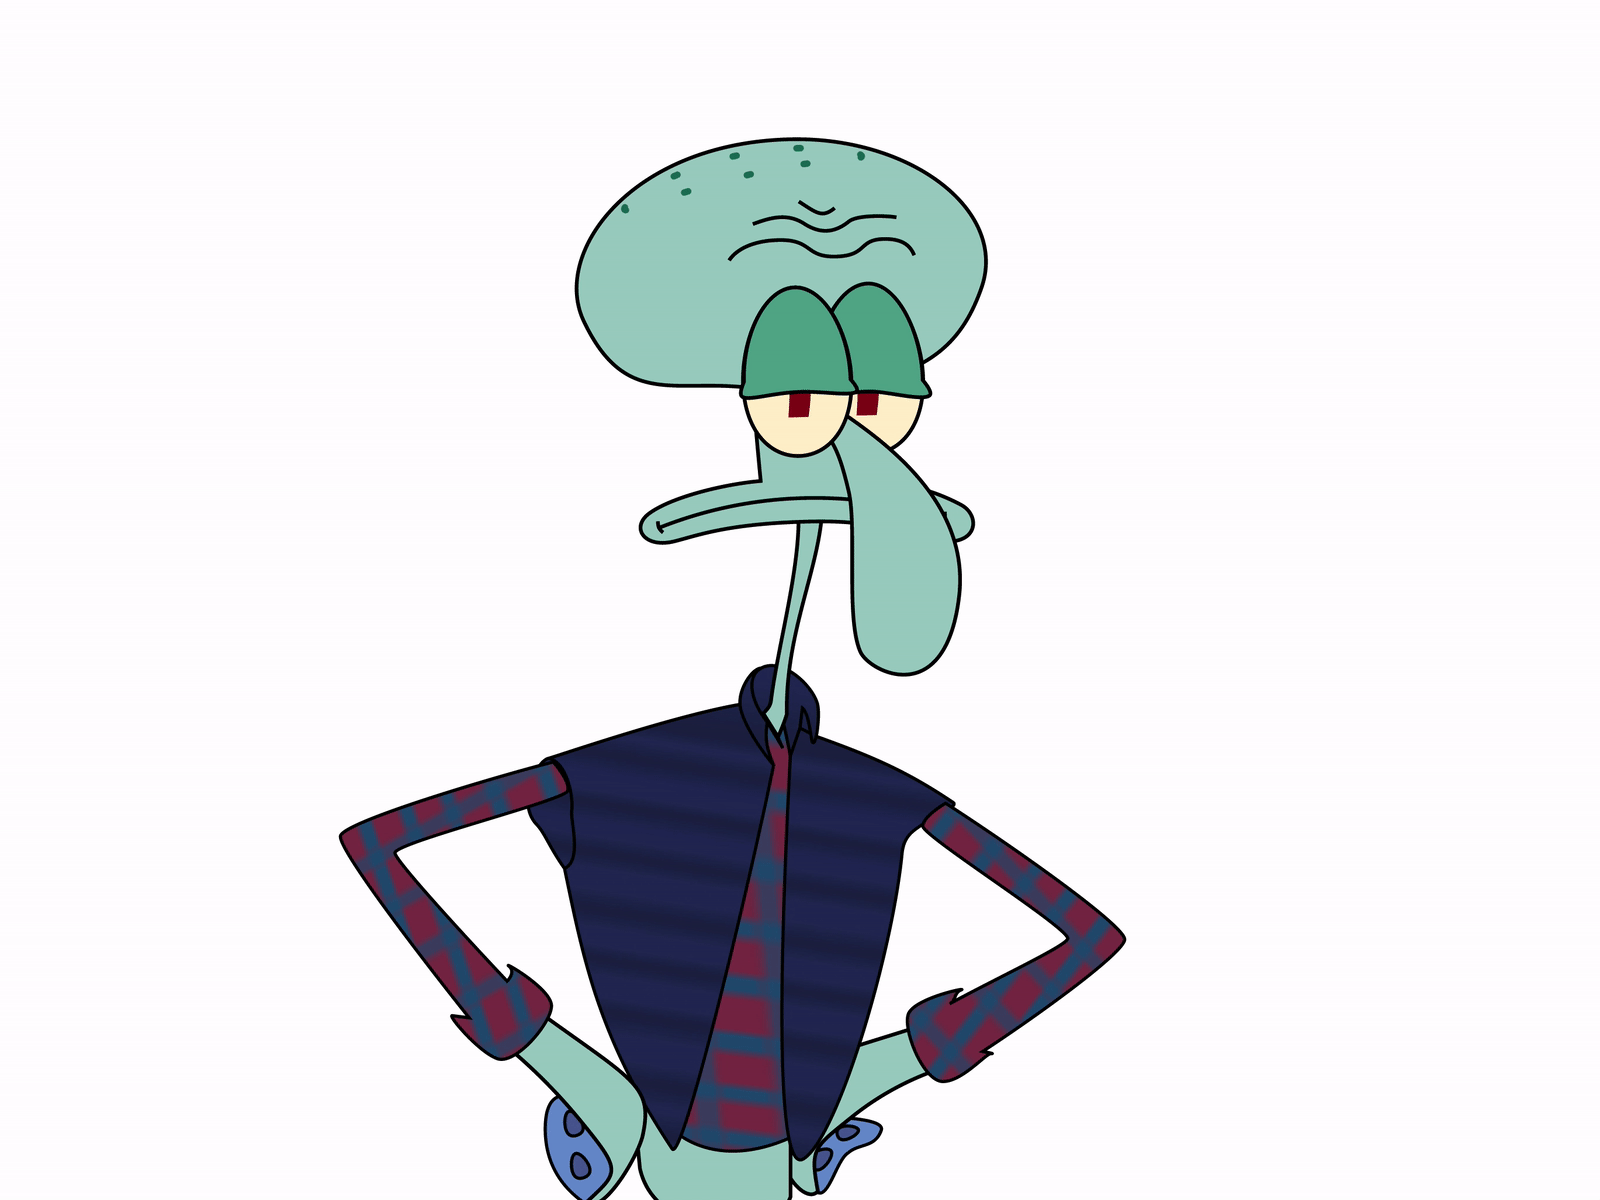 Squidward has the disappoint